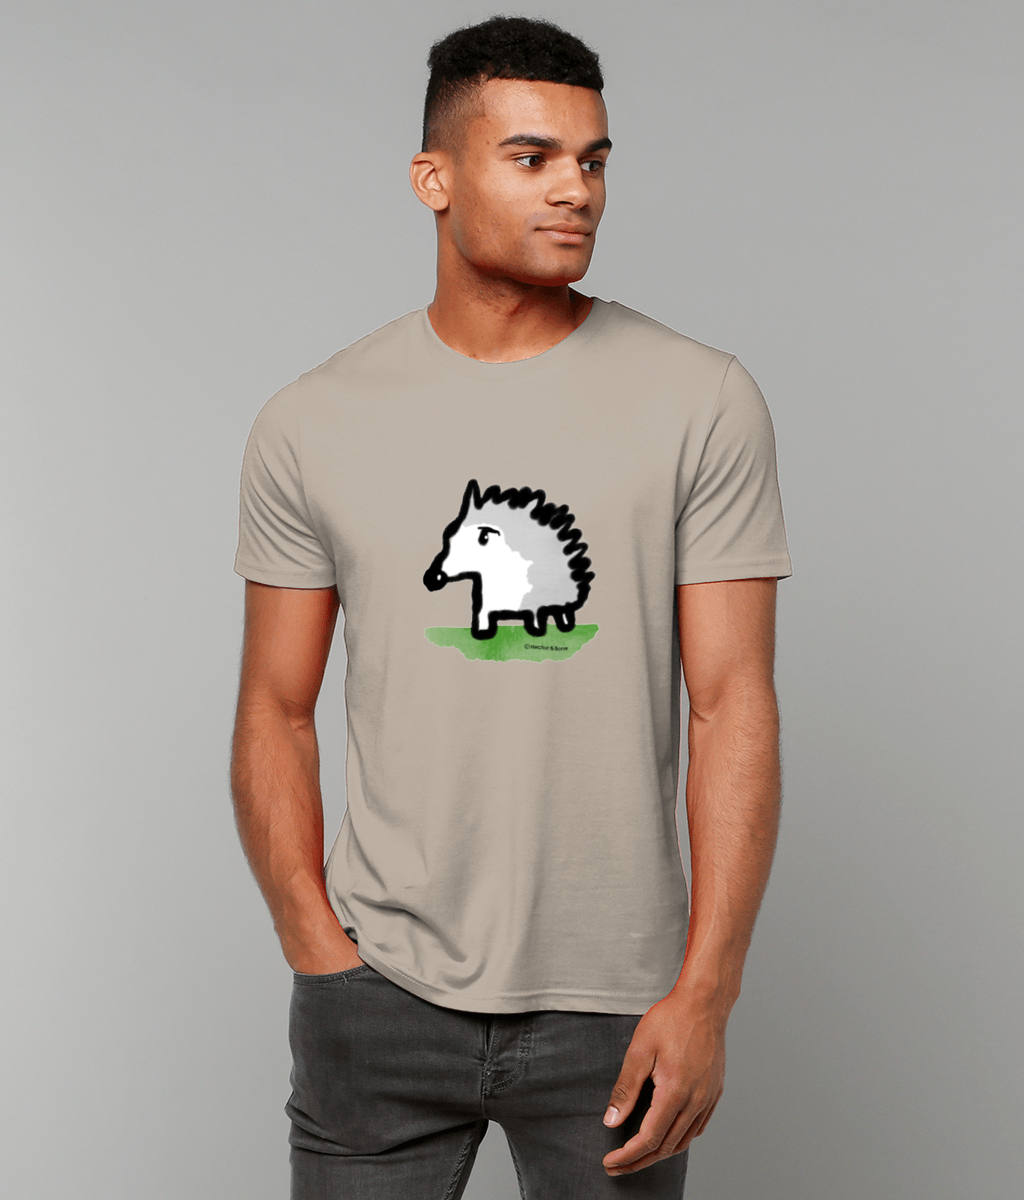 Hedgehog T-shirt - Young man wearing a cute illustrated baby hedgehog t-shirt in desert dust colour vegan cotton tshirt by Hector and Bone